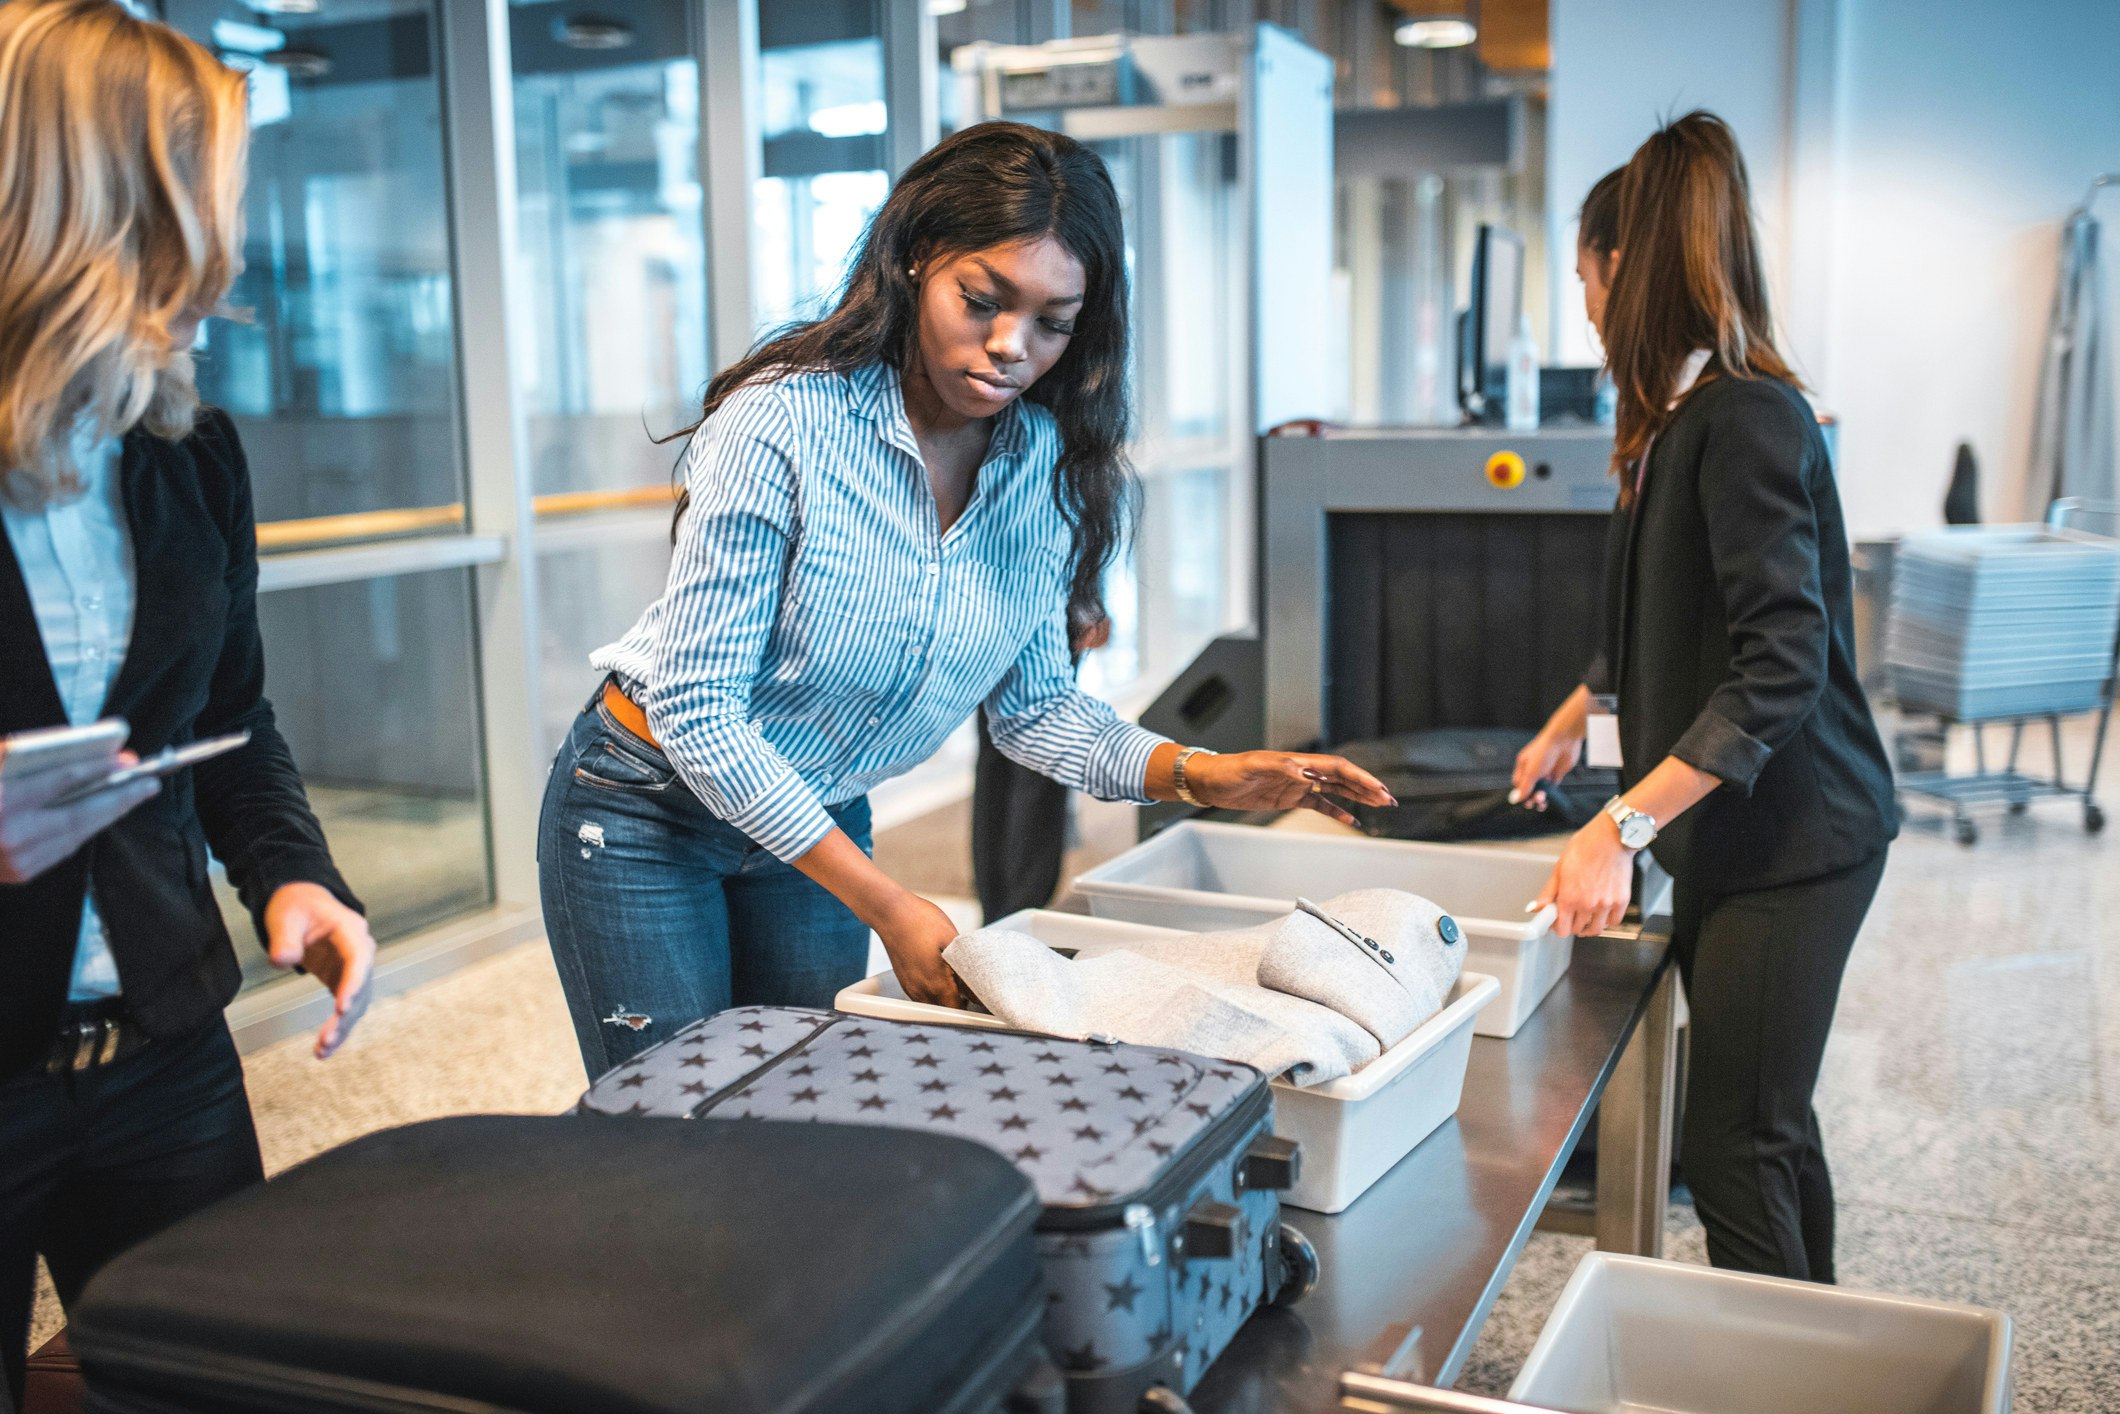 A woman putting her carry-on luggage through airport security.